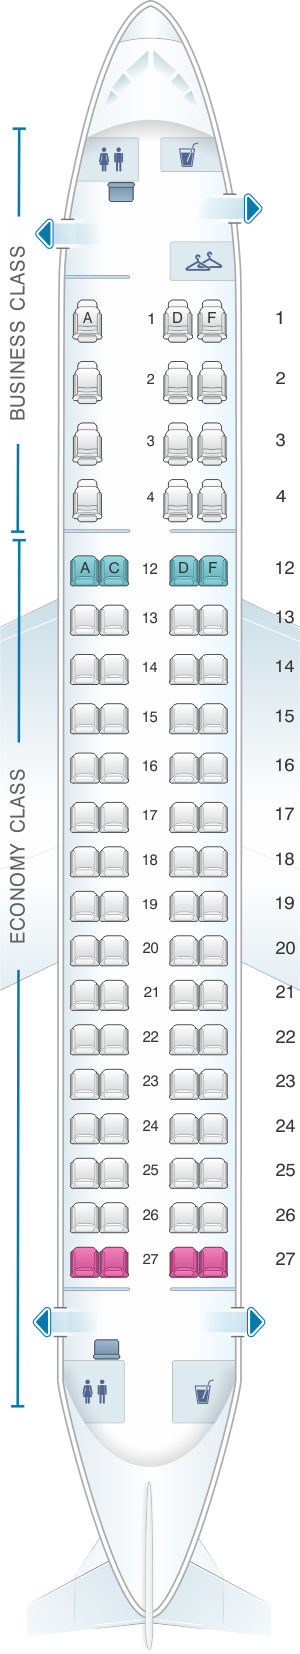 Embraer E175 Seating Chart